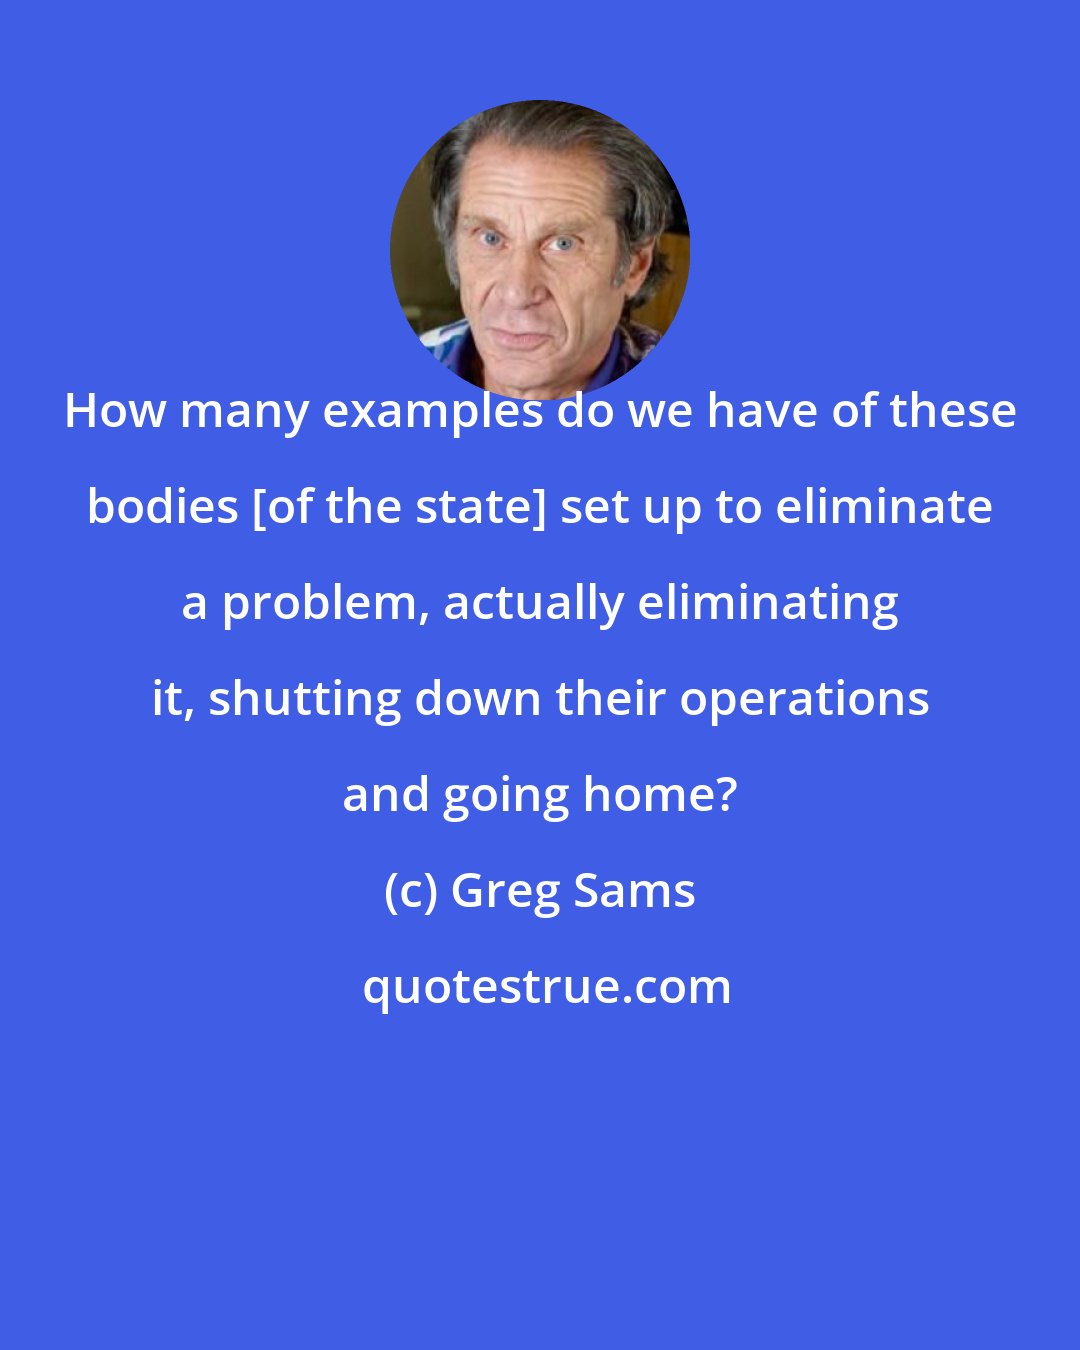 Greg Sams: How many examples do we have of these bodies [of the state] set up to eliminate a problem, actually eliminating it, shutting down their operations and going home?